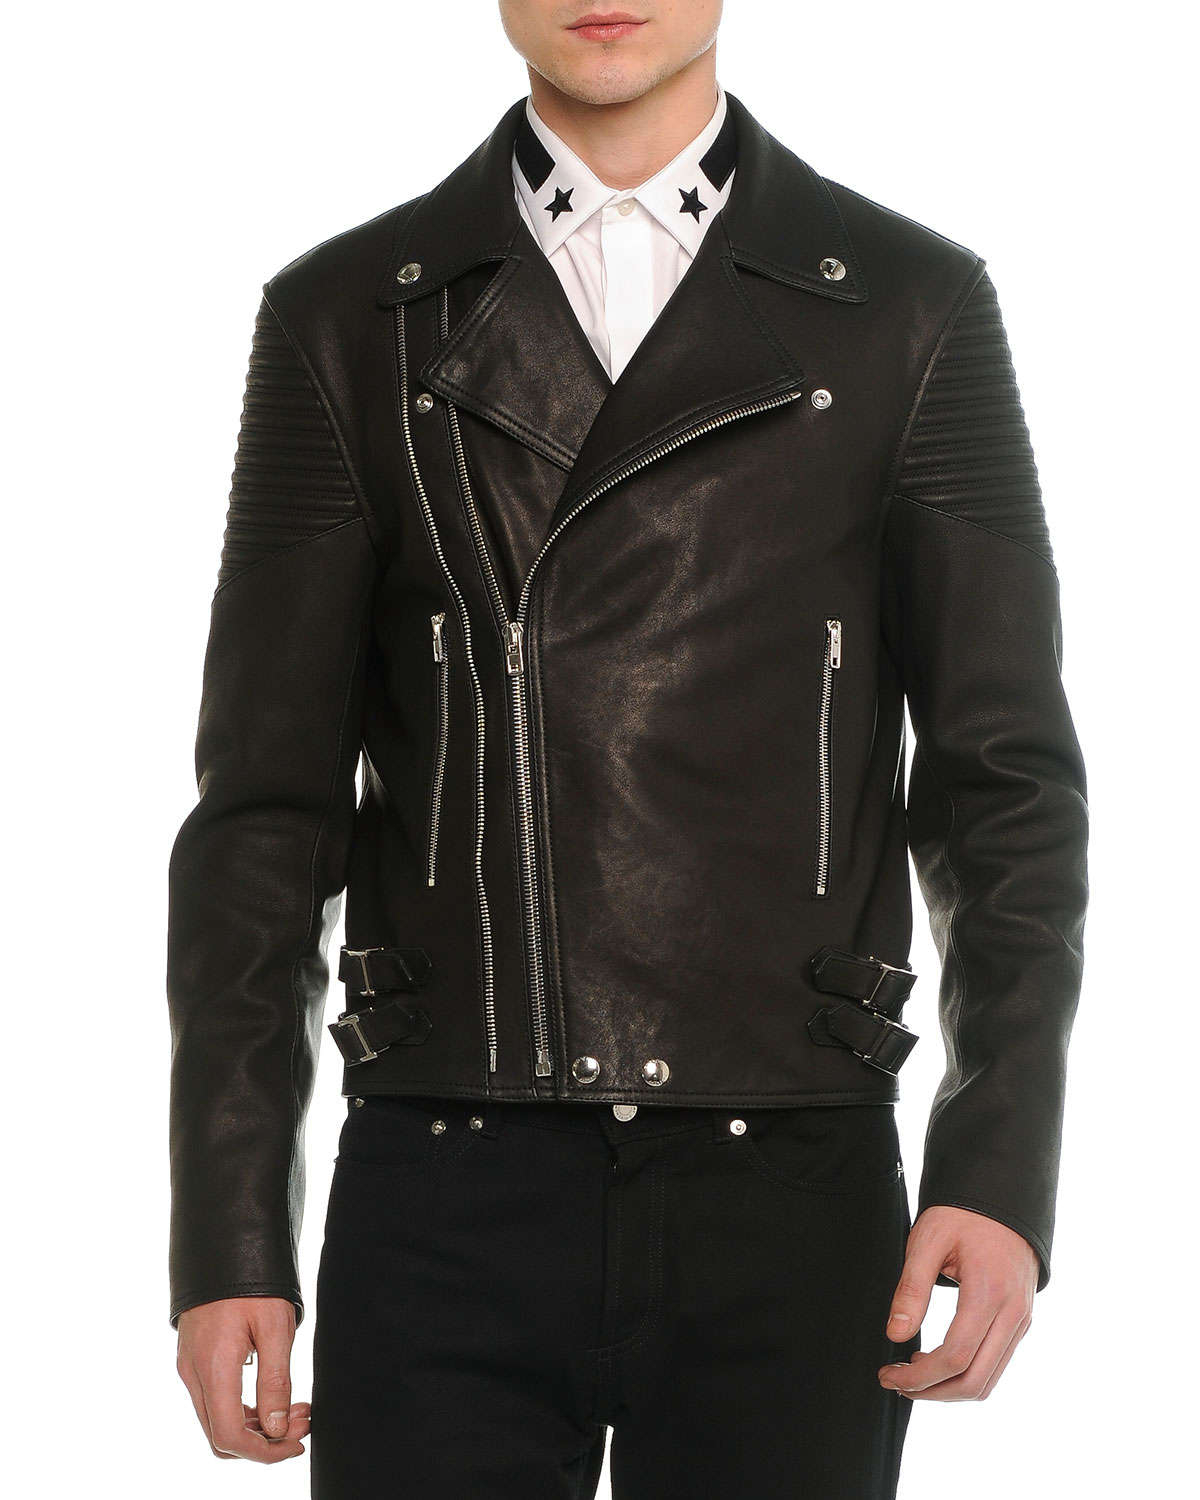 Lyst - Givenchy Asymmetric Leather Moto Jacket in Black for Men